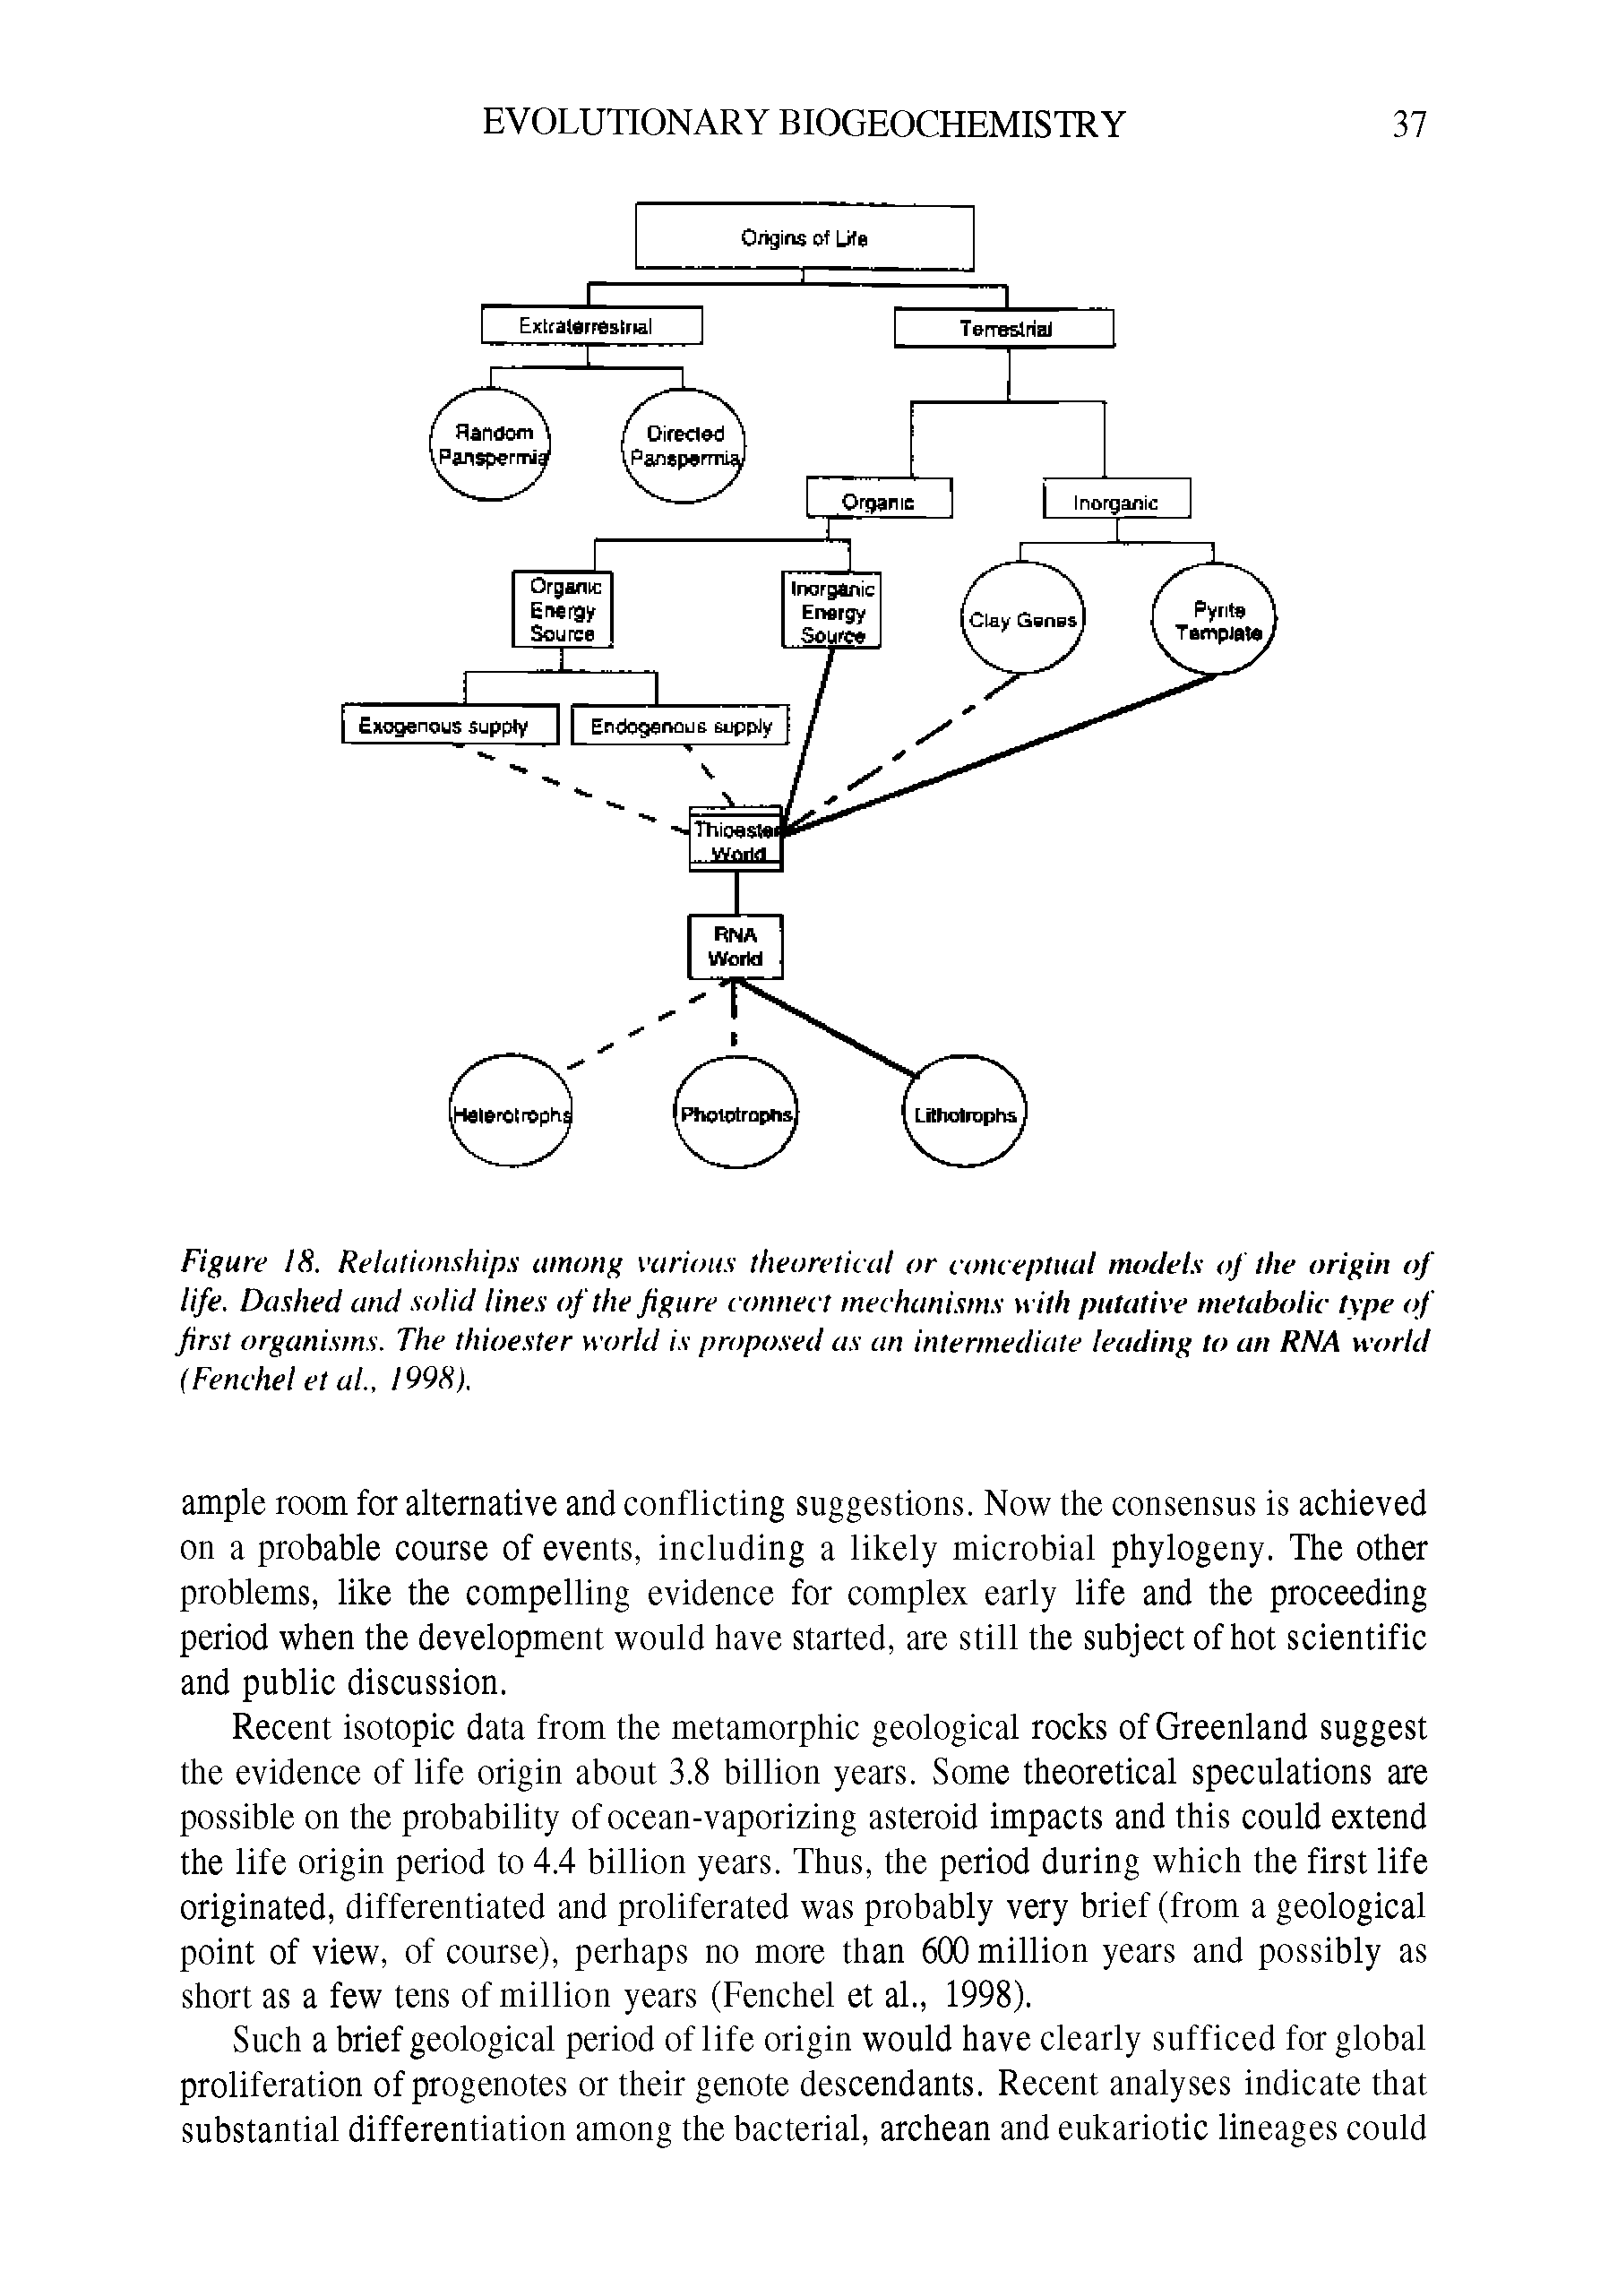 Figure 18. Relationships among various theoretical or conceptual models of the origin of life. Dashed and solid lines of the figure connect mechanisms with putative metabolic type of first organisms. The thioester world is propo.sed as an intermediate leading to an RNA world Fenchel et ai. 1998).